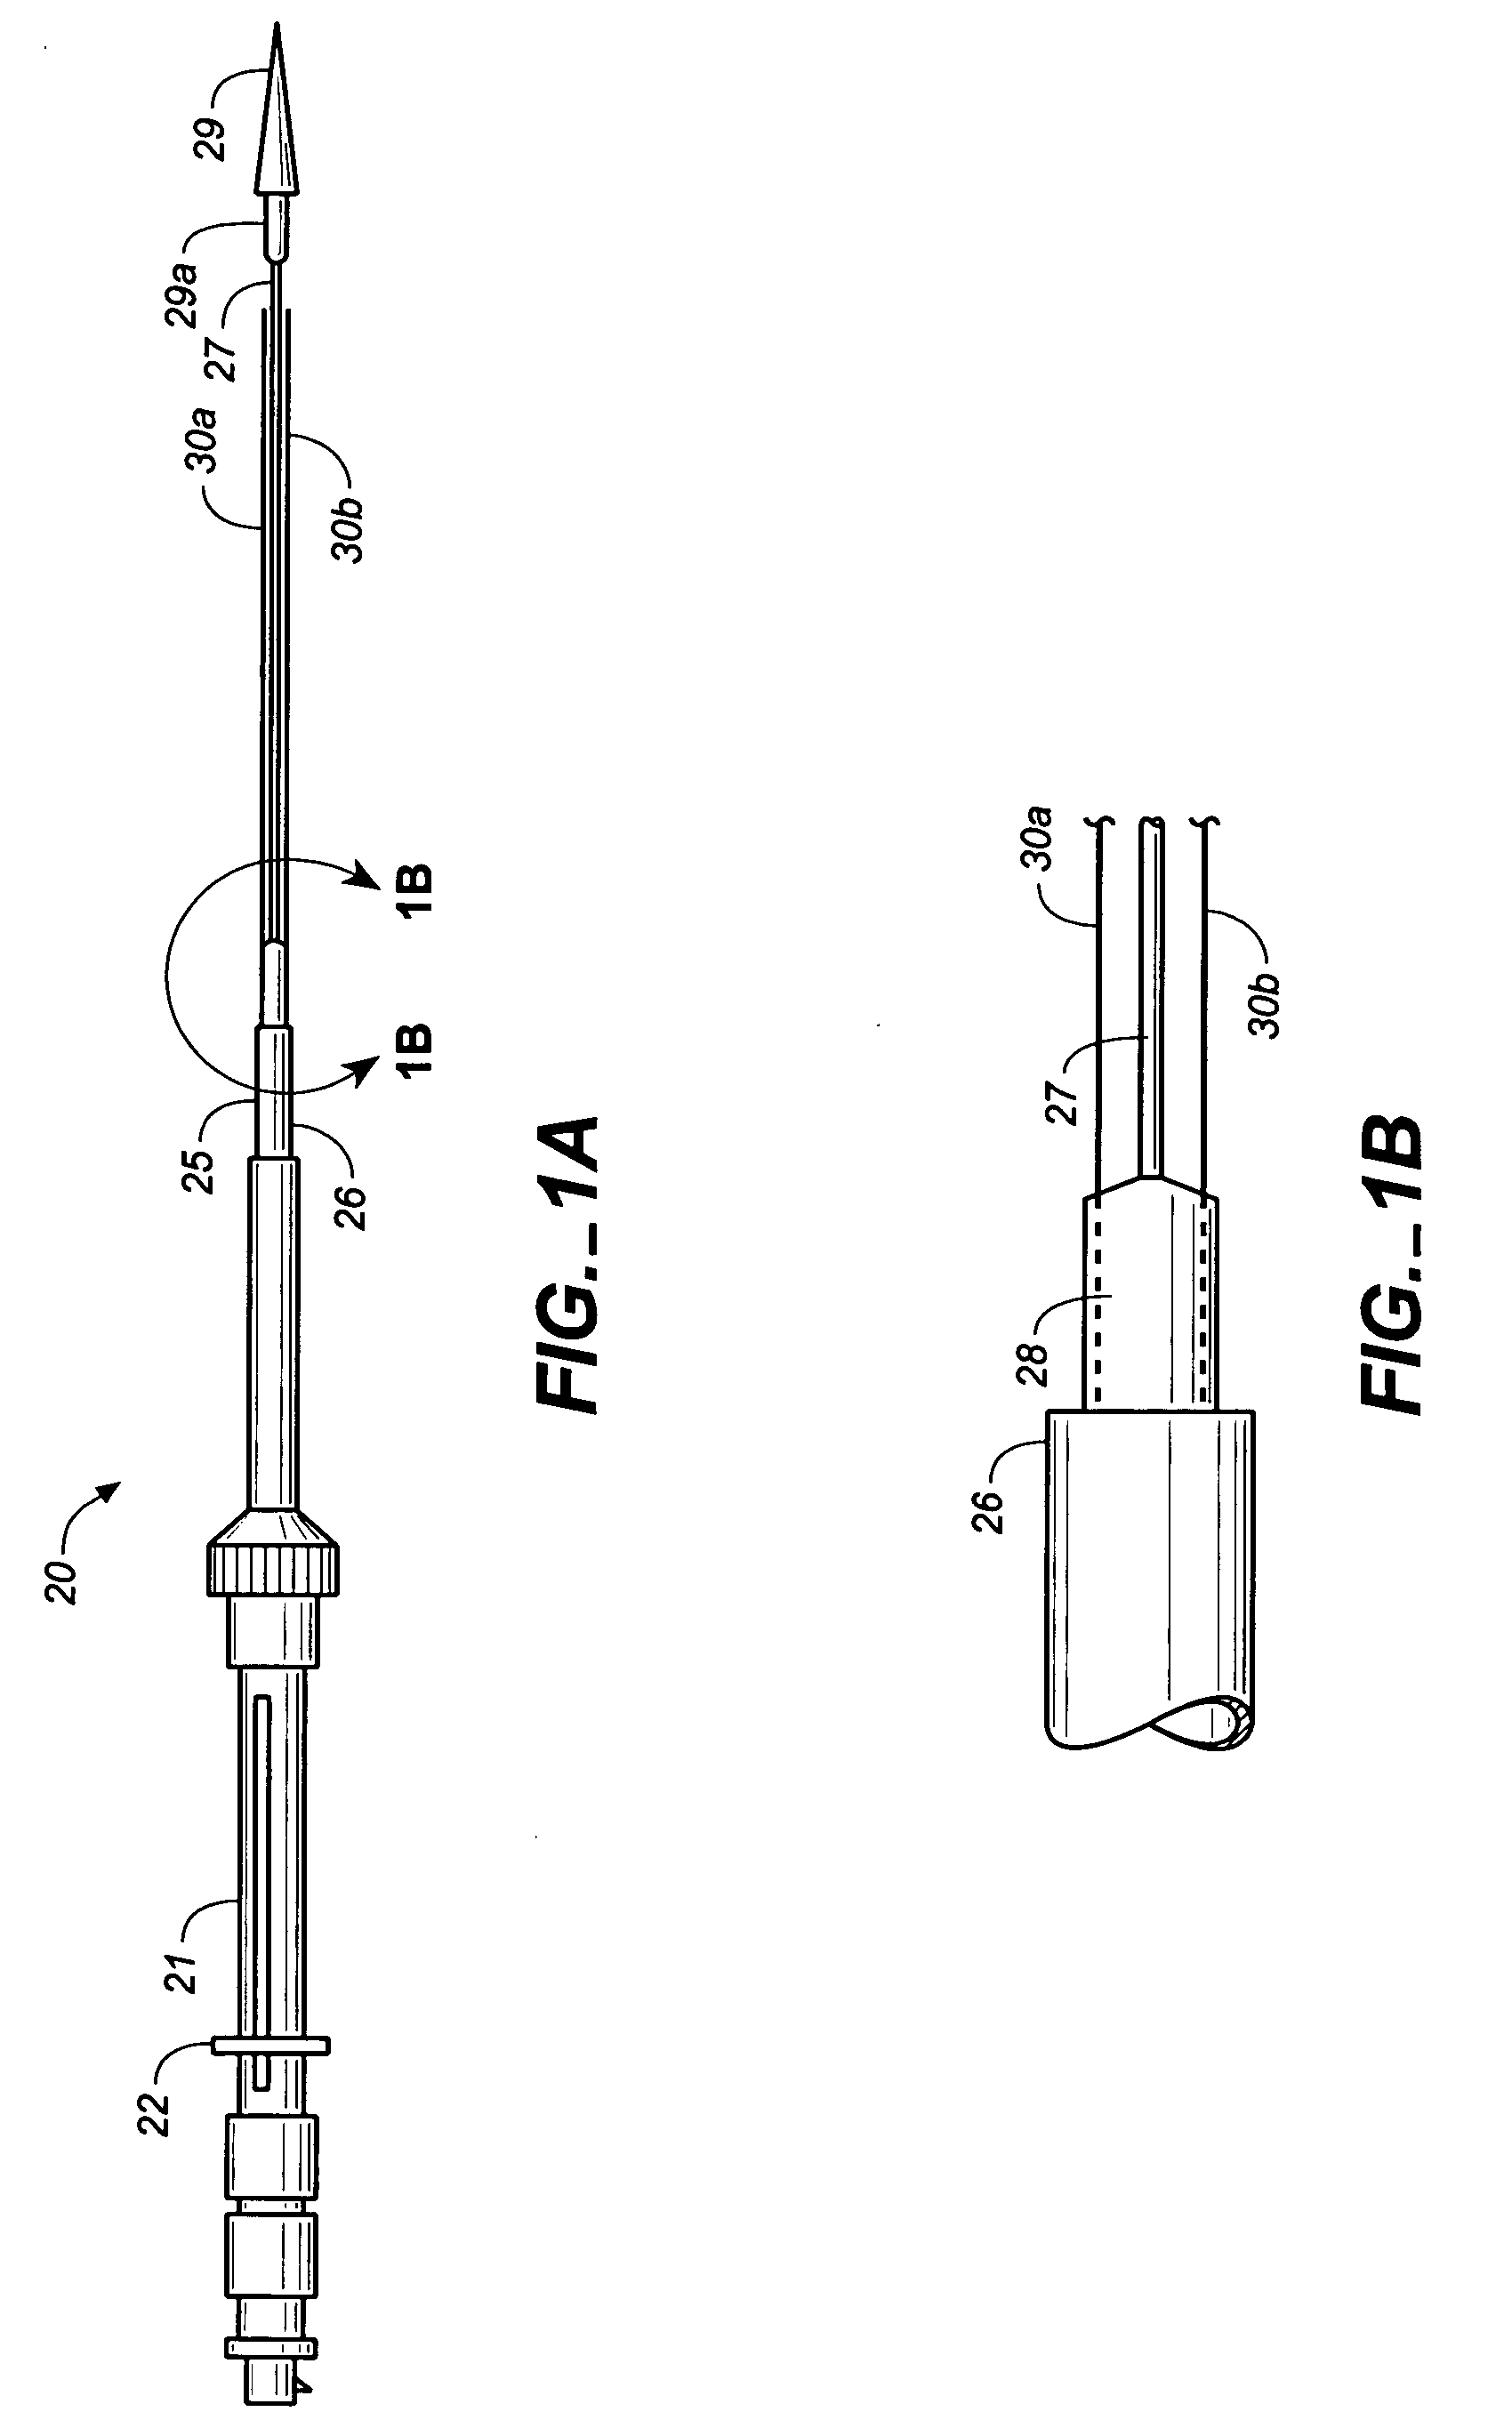 Device and method for delivering an endovascular stent-graft having a longitudinally unsupported portion